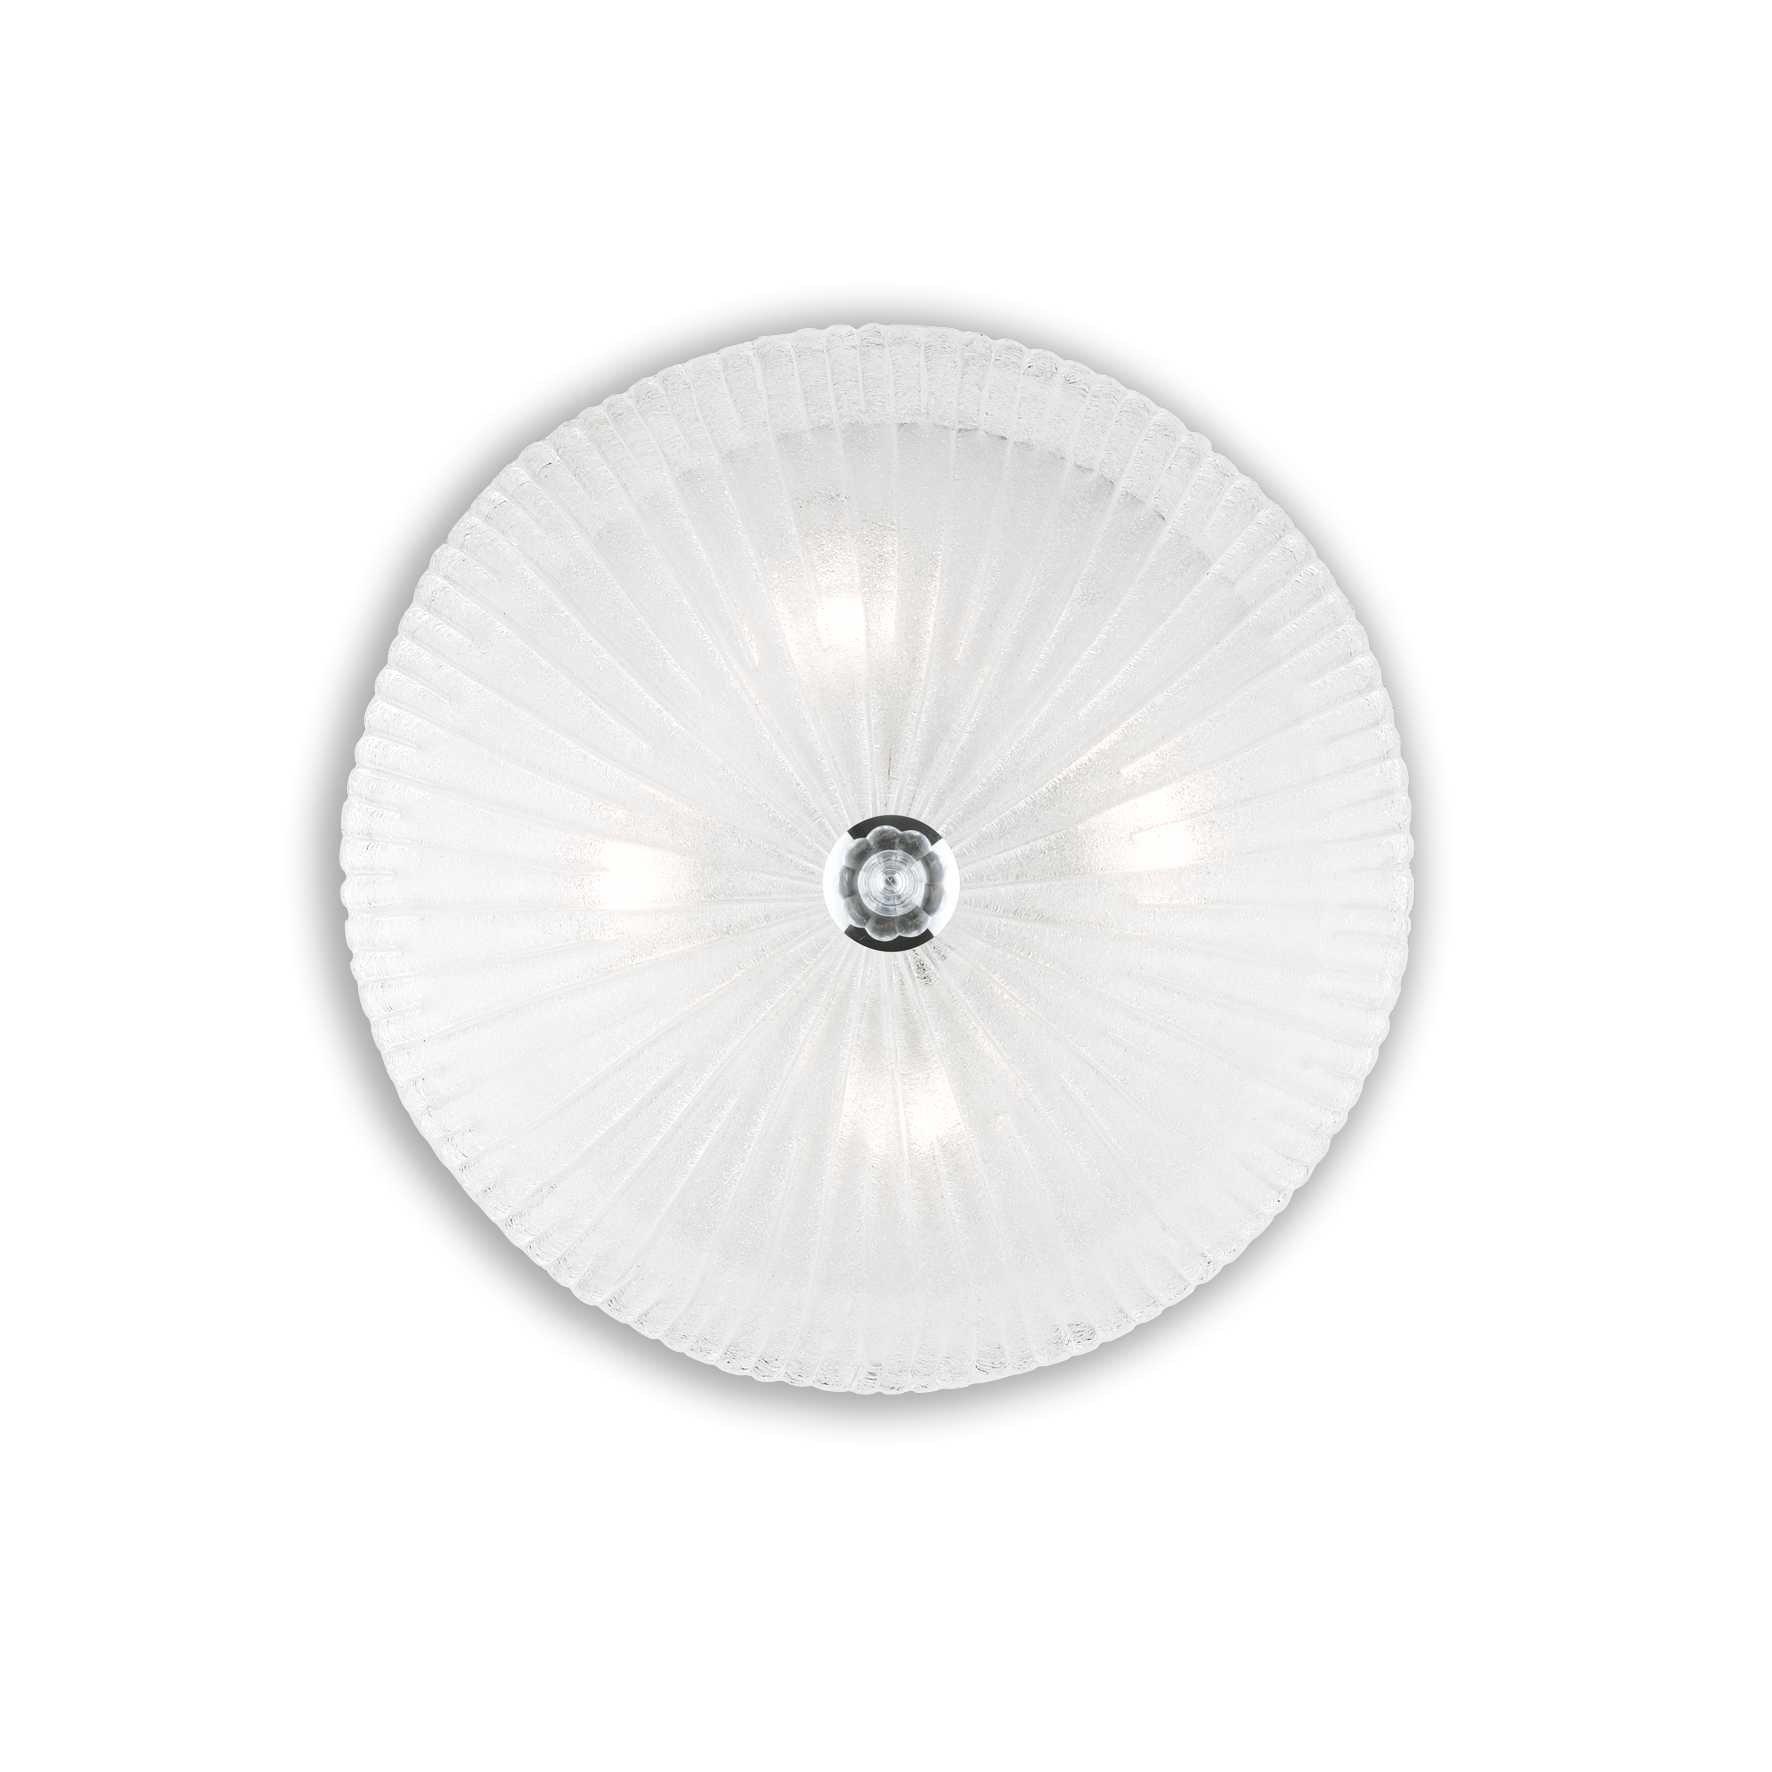 Shell 4 Light Indoor Wall Ceiling Light Chrome with Clear Glass E27